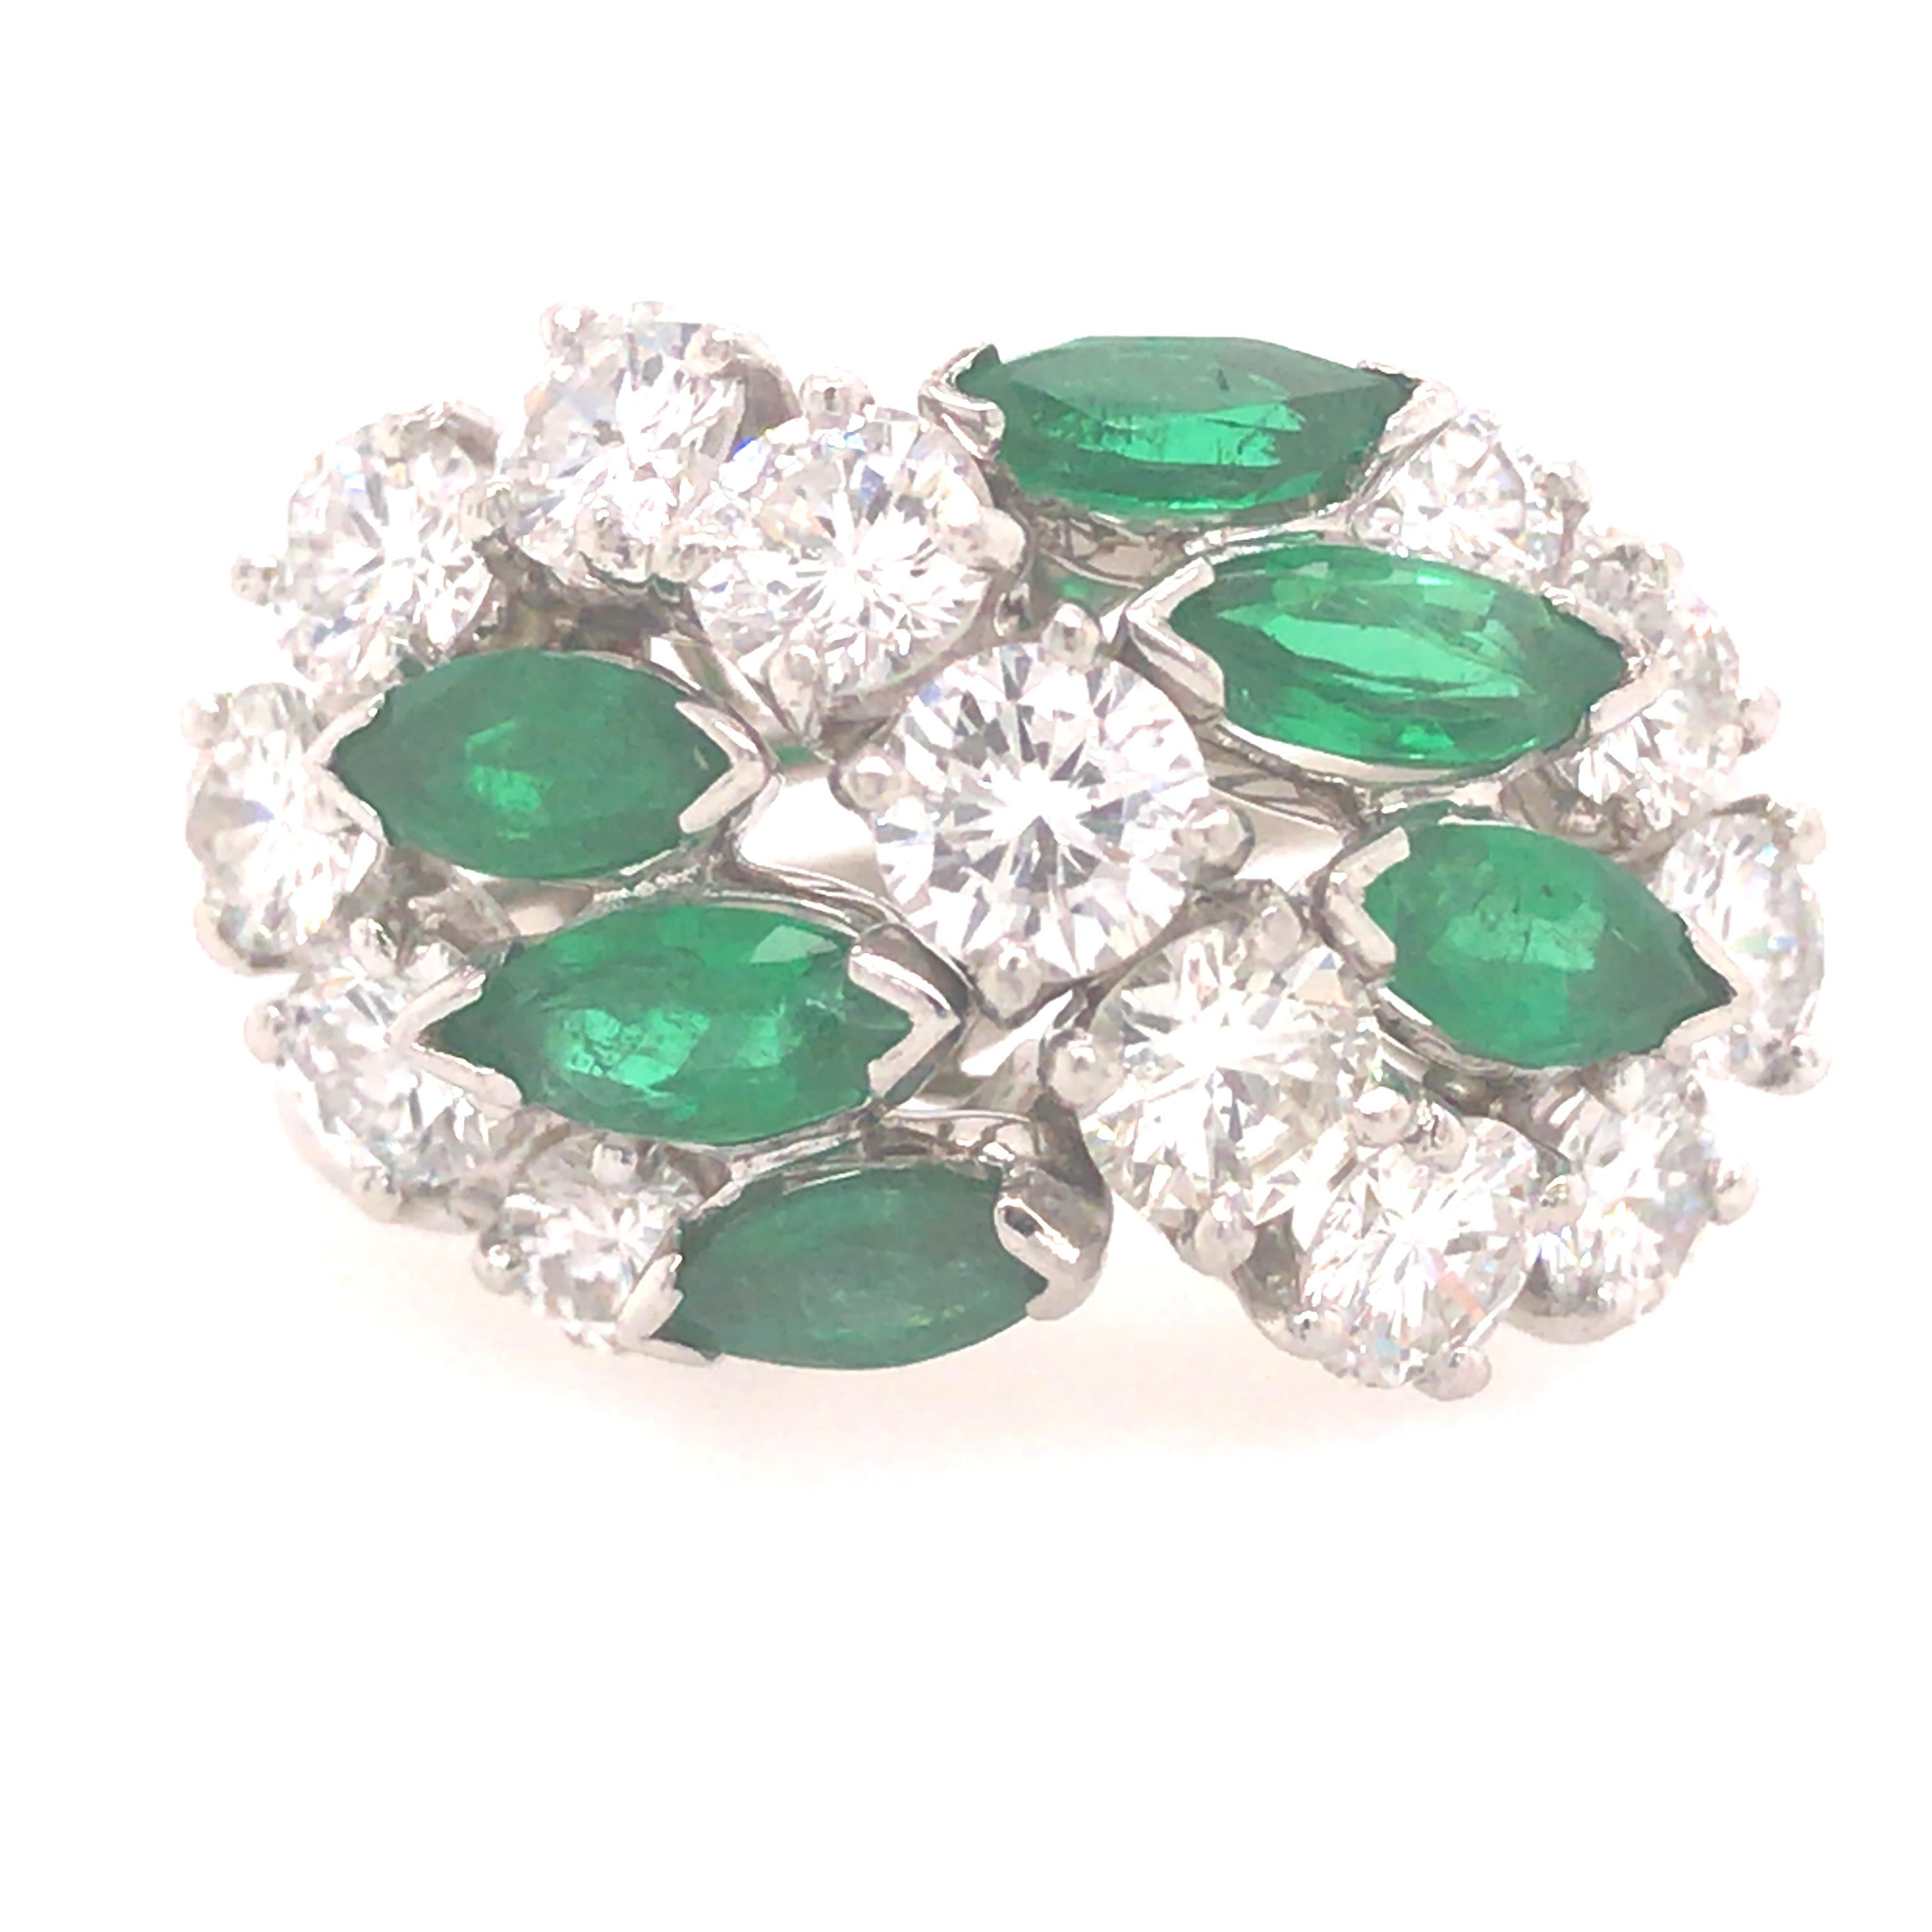 Oscar Heyman Emerald and Diamond Ring in Platinum.  (6)  Marquise Shape Green Emeralds weighing 1.80 carat total weight and (13) Round Brilliant Cut Diamonds weighing 2.02 carat total weight, F-G in color and VS in clarity are expertly set.  Ring